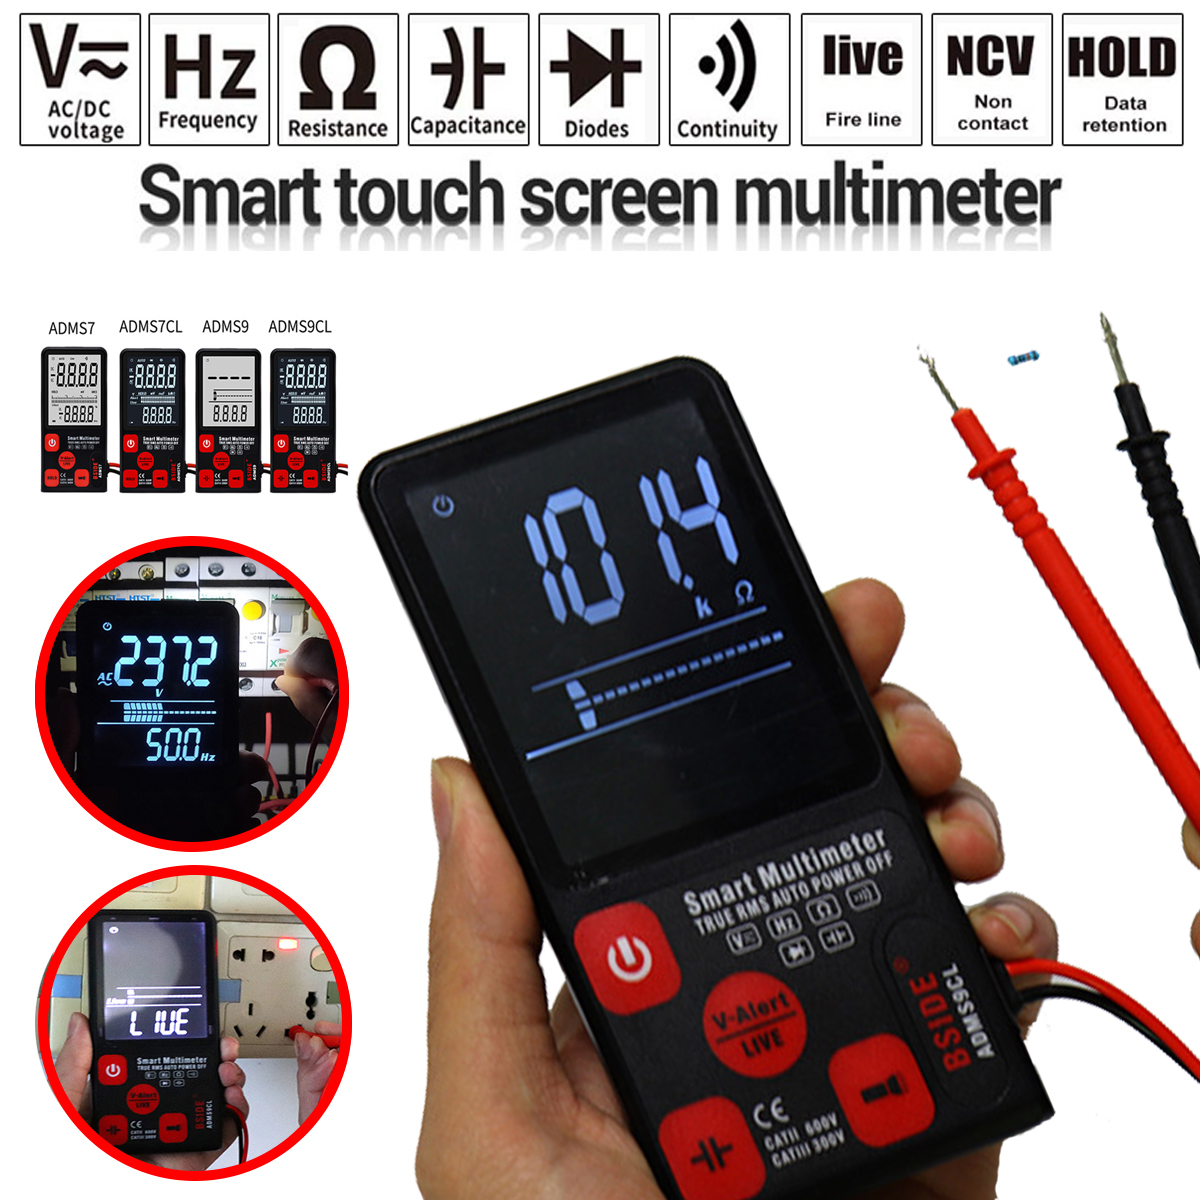 ADMS79-ADMS79-CL--Analog-Tester-Digital-Multimeter-Touch-DCAC-RMS-Multimeter-Transistor-Capacitor-1733095-1